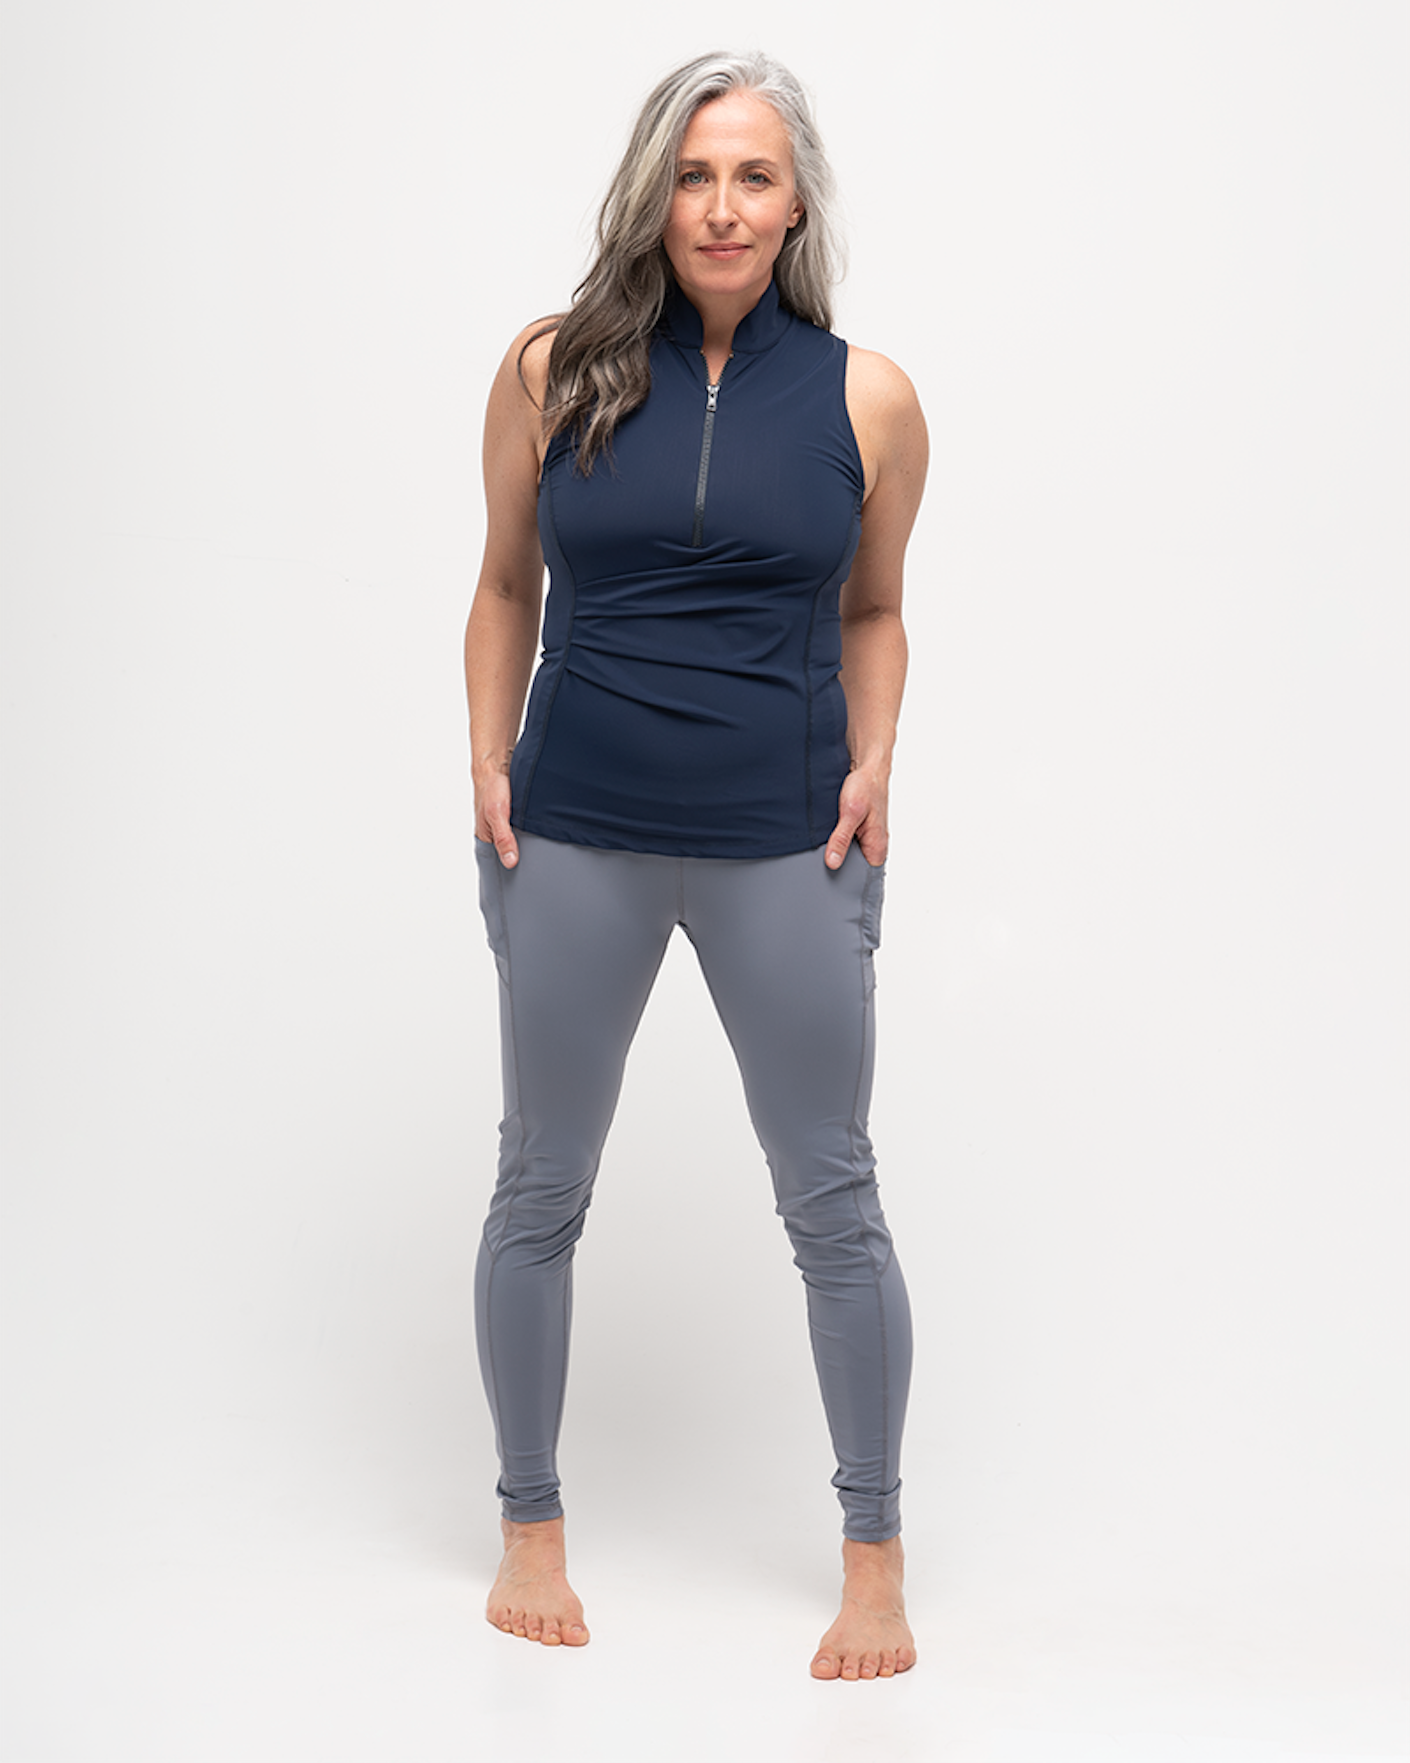 a woman in sun protection leggings